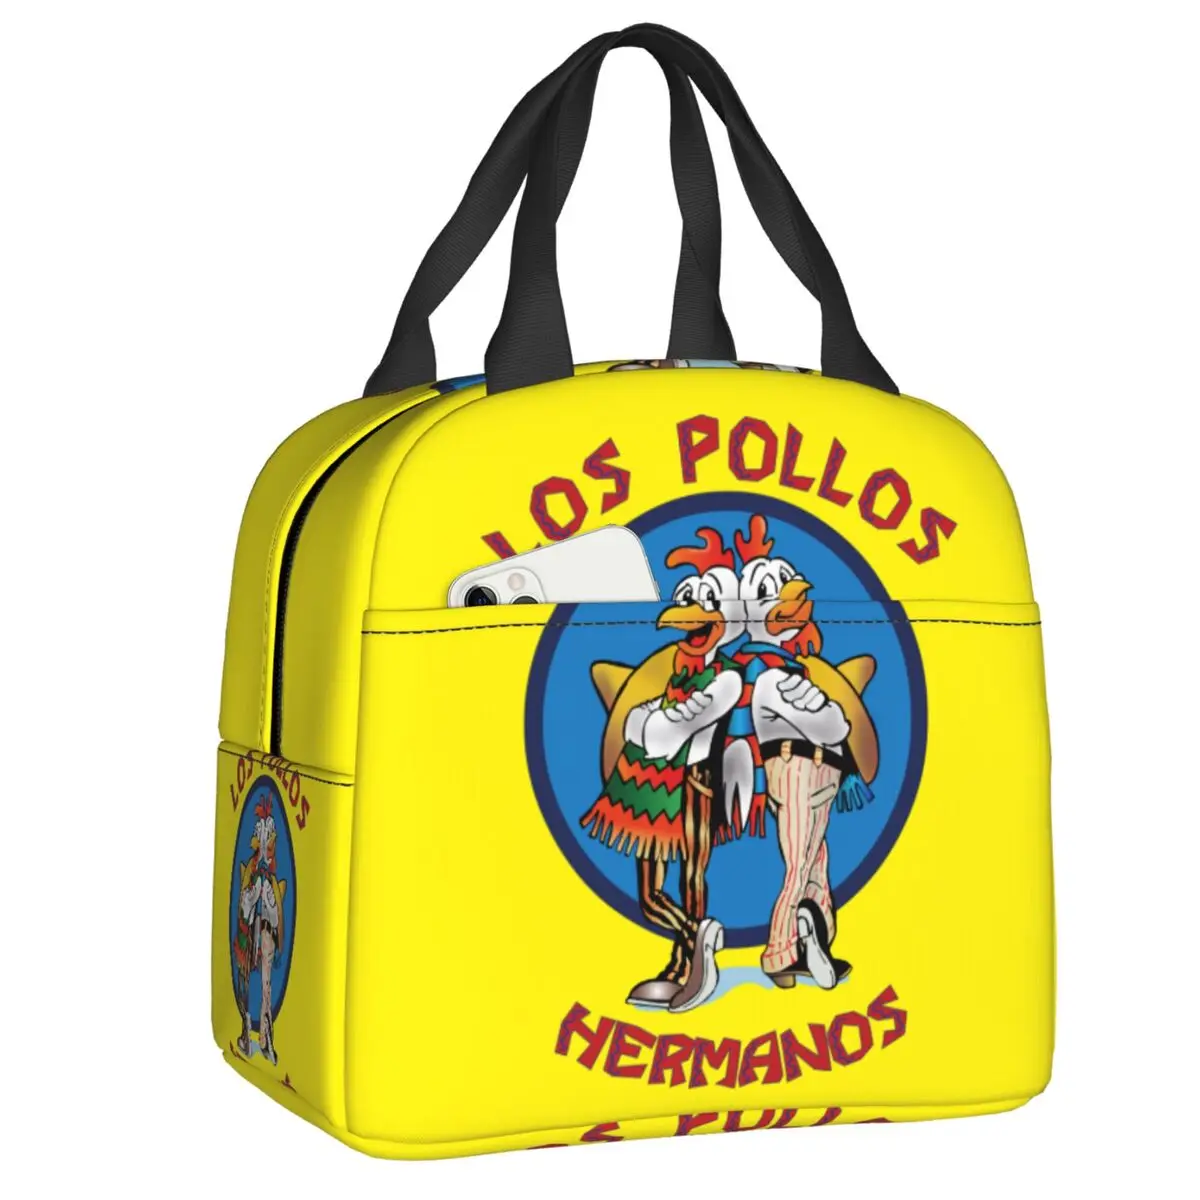 

Breaking Bad Lunch Box Cooler Thermal Insulated Los Pollos Hermanos Chicken Brothers Lunch Tote Bag for Women Kids Food Bags